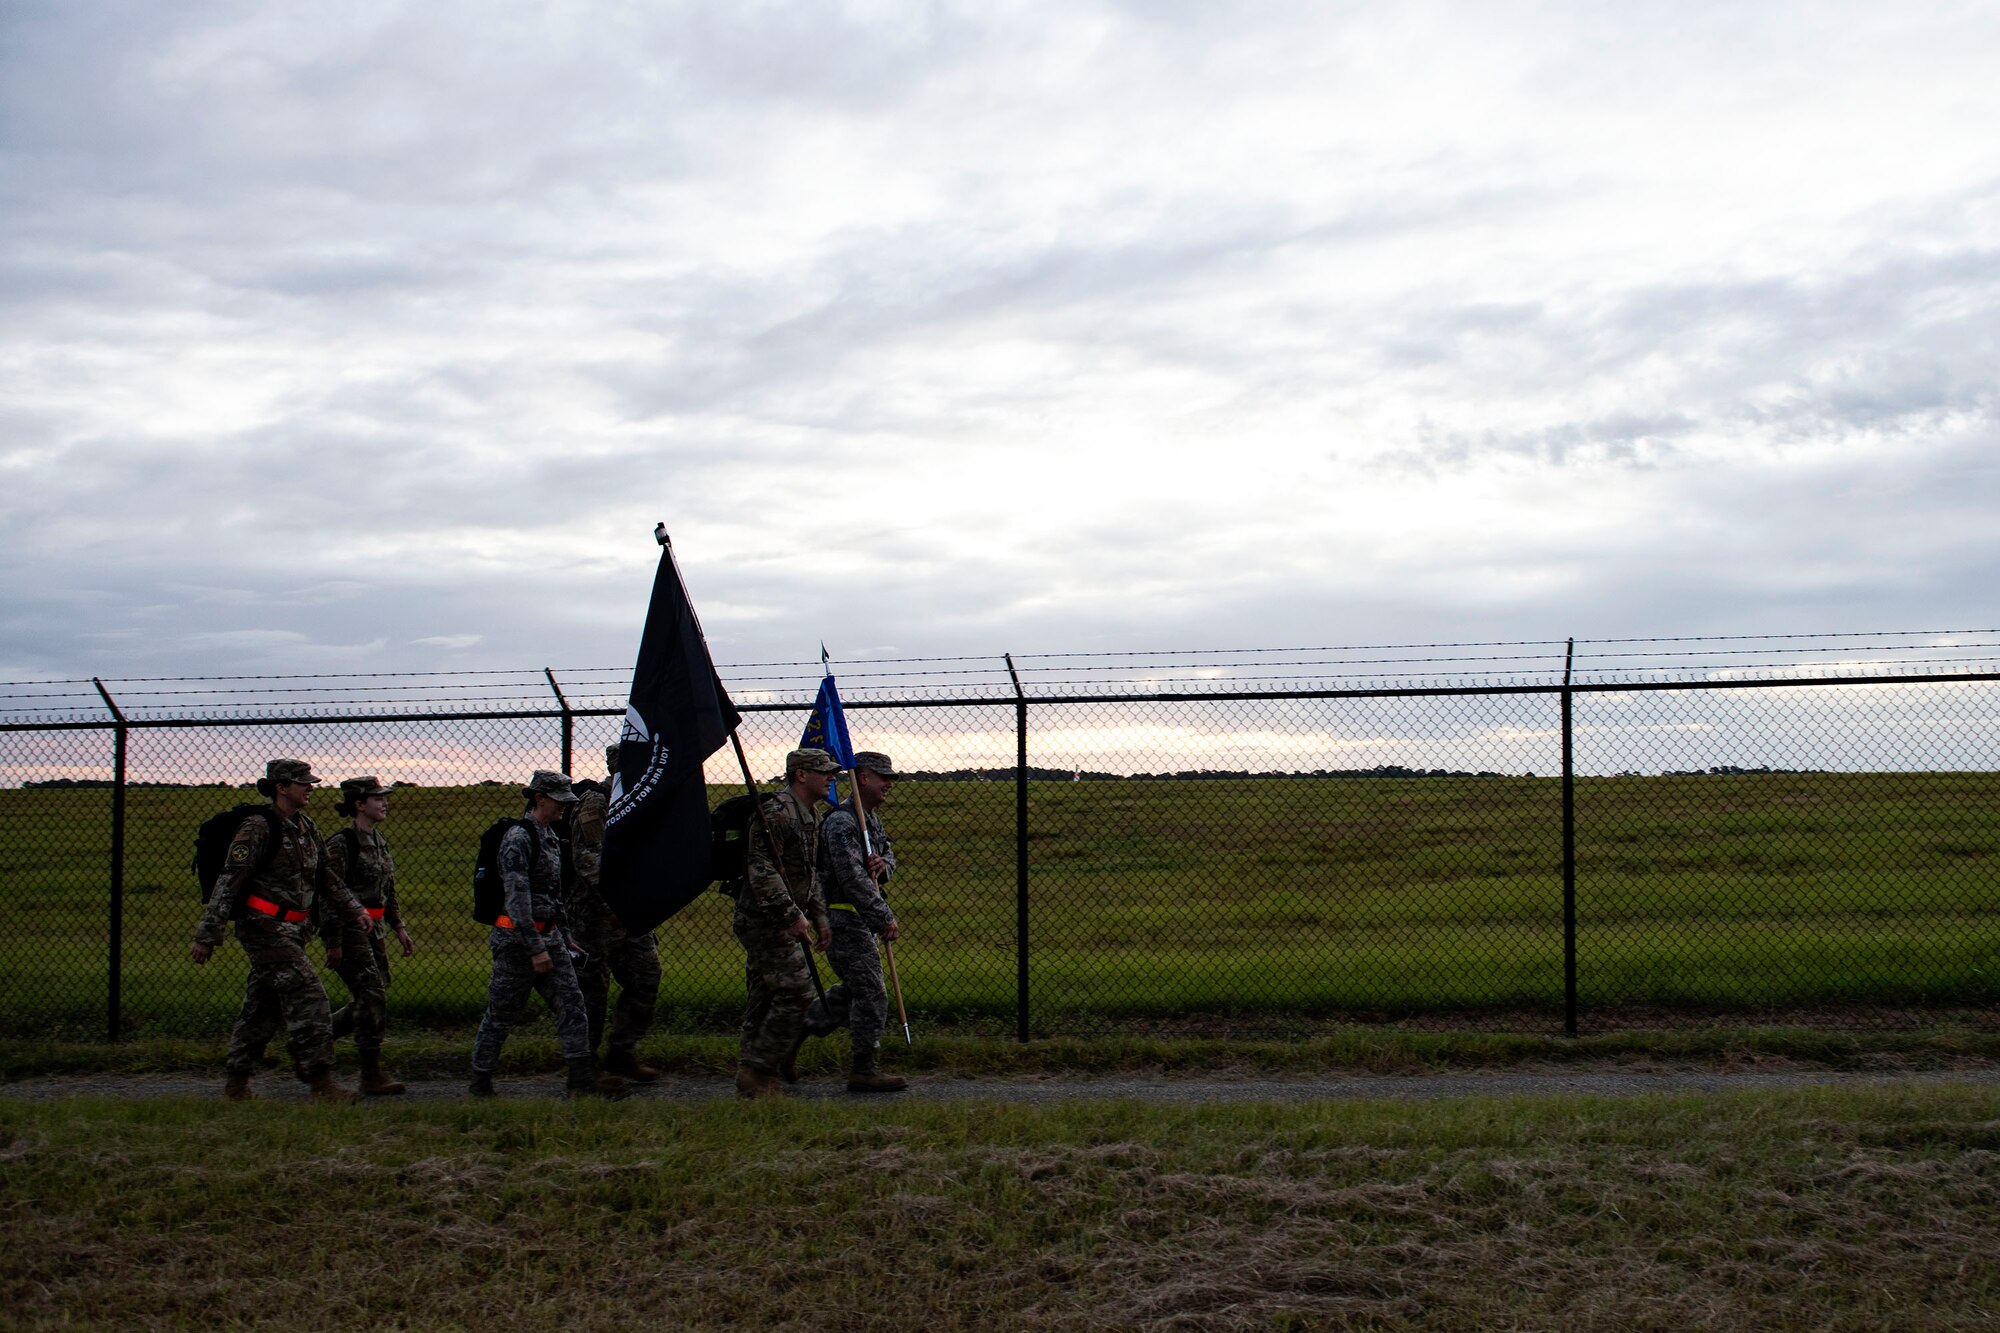 Airmen from the 476th Fighter Group participate in the POW/MIA Recognition Day ruck march Sept. 20, 2019, at Moody Air Force Base, Ga. The 347th Operations Support Squadron hosted the 24-hour ruck march to pay tribute to those who’ve been captured or missing in the line of duty. (U.S. Air Force photo by Senior Airman Erick Requadt)